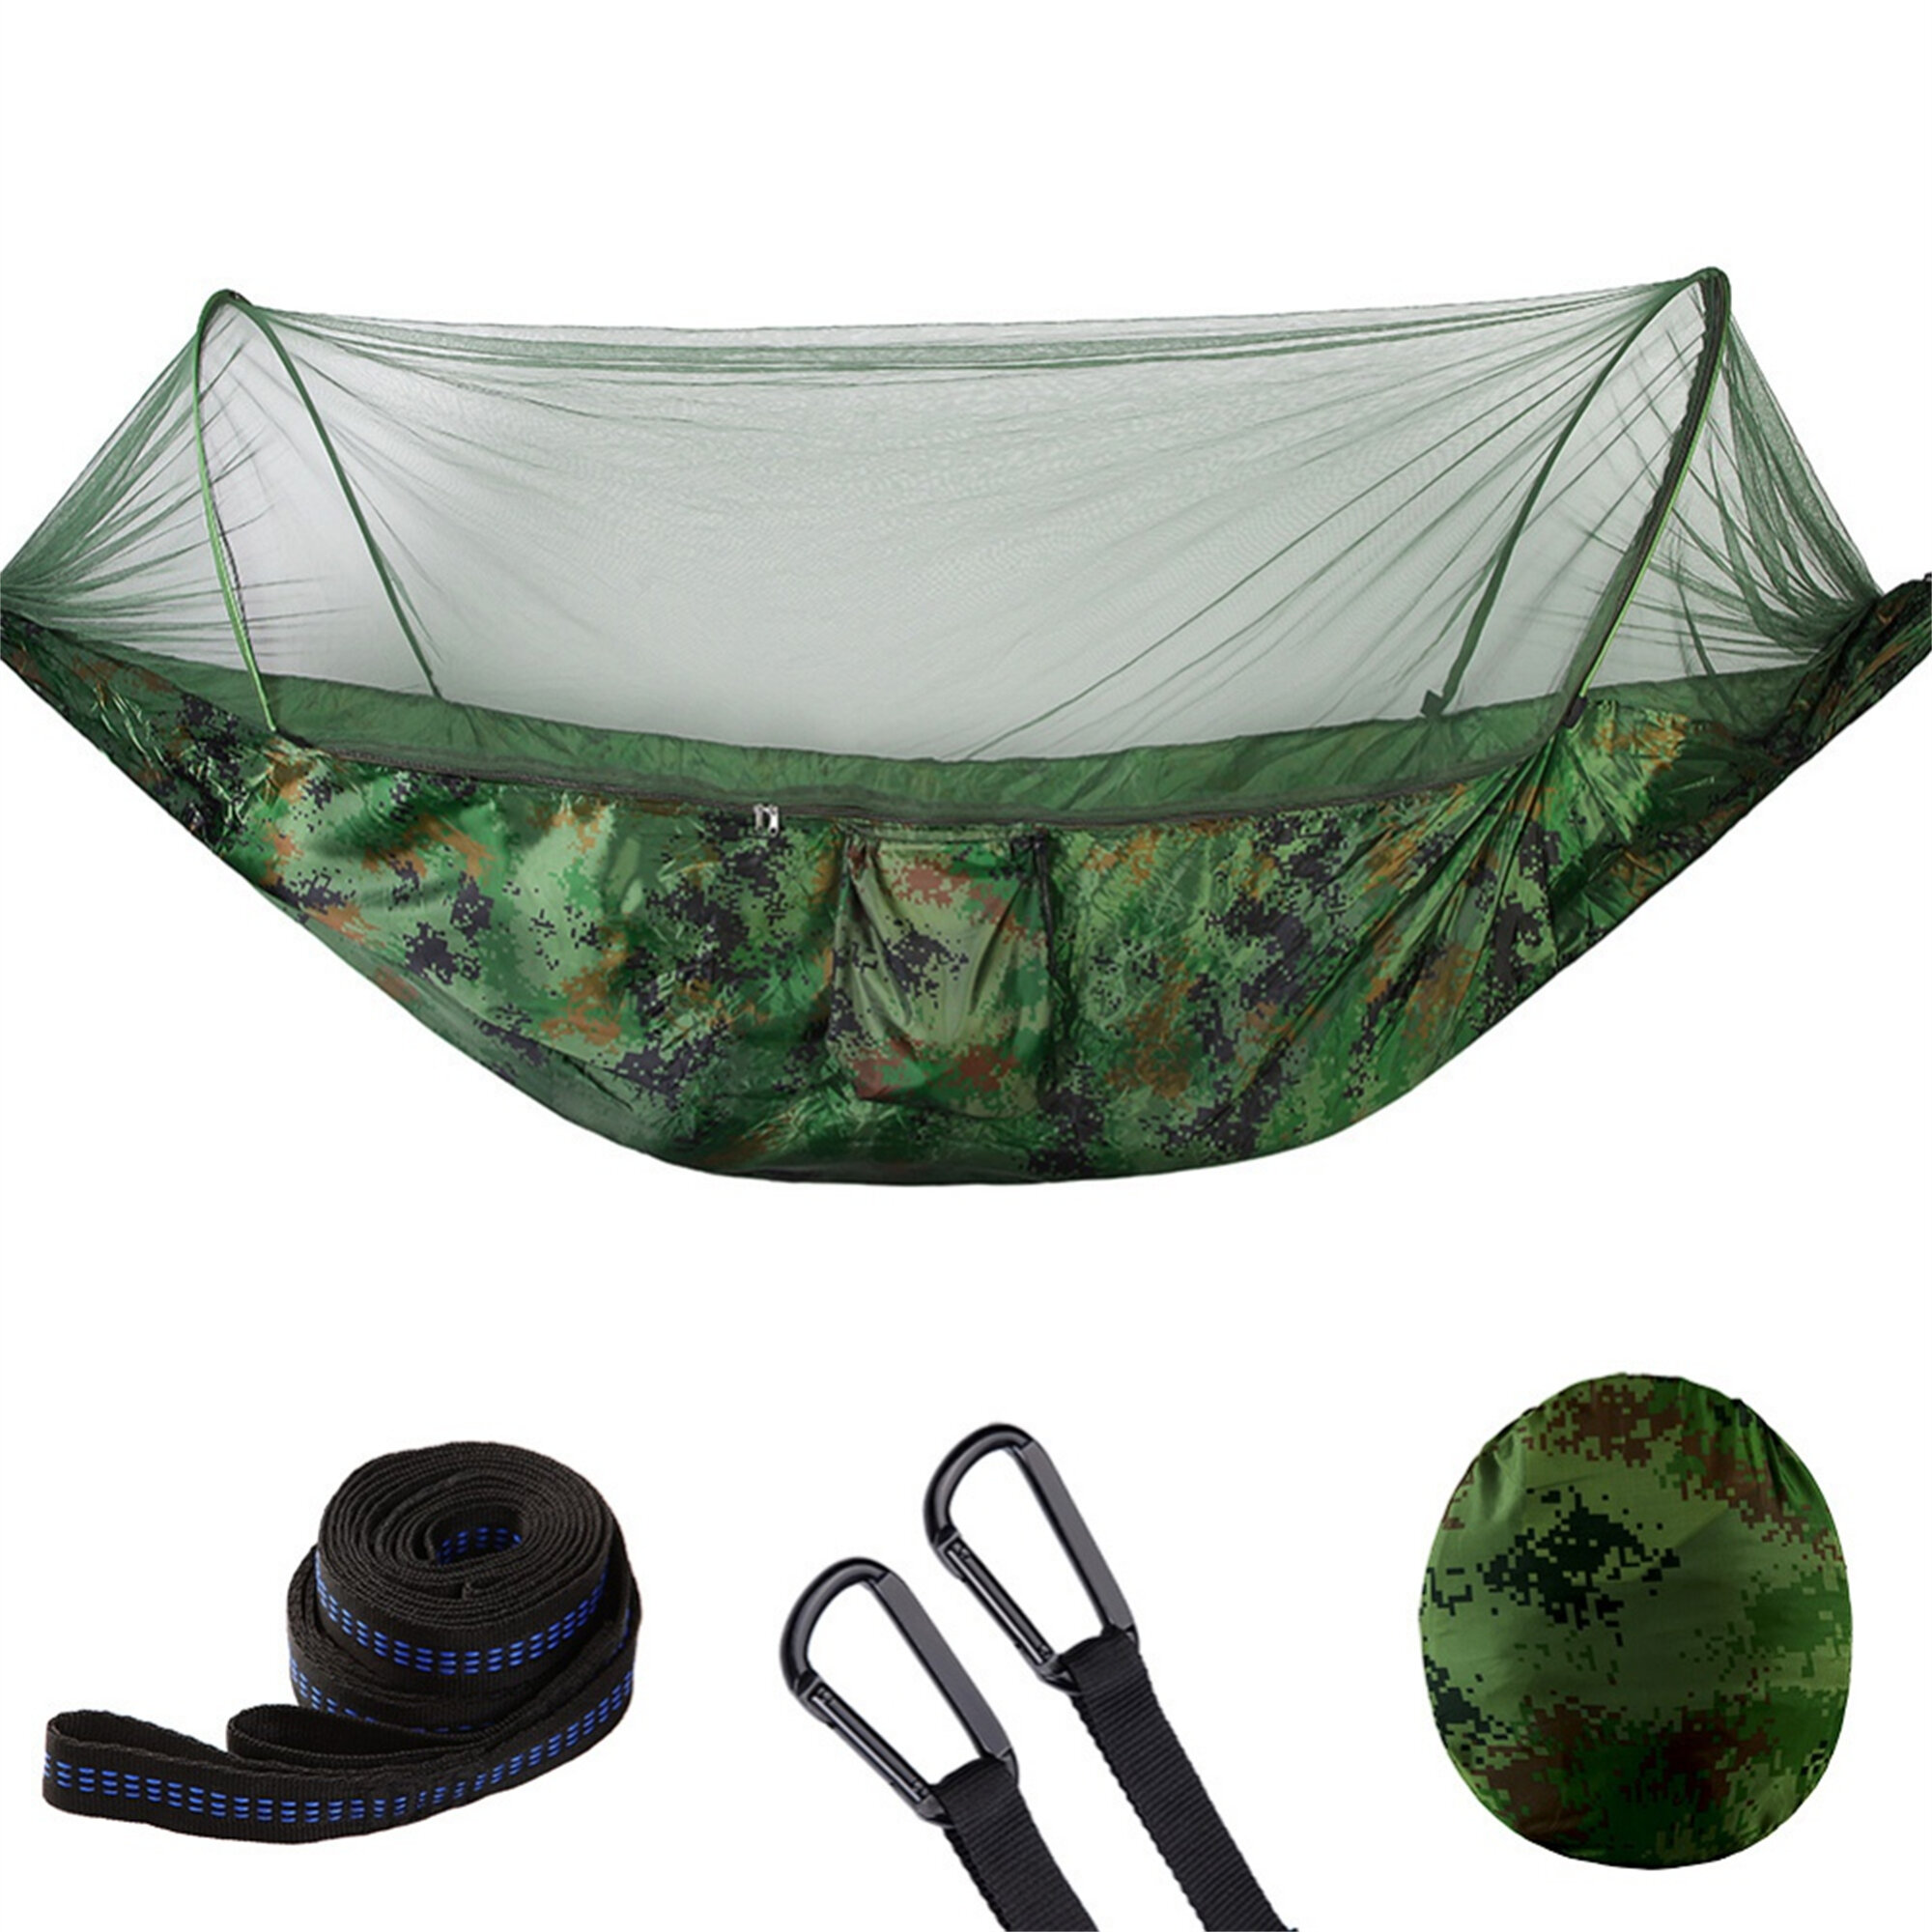 3In1 Camping Hammock 2Person Parachute Tent Hiking Travel Outdoor Swing Fly 